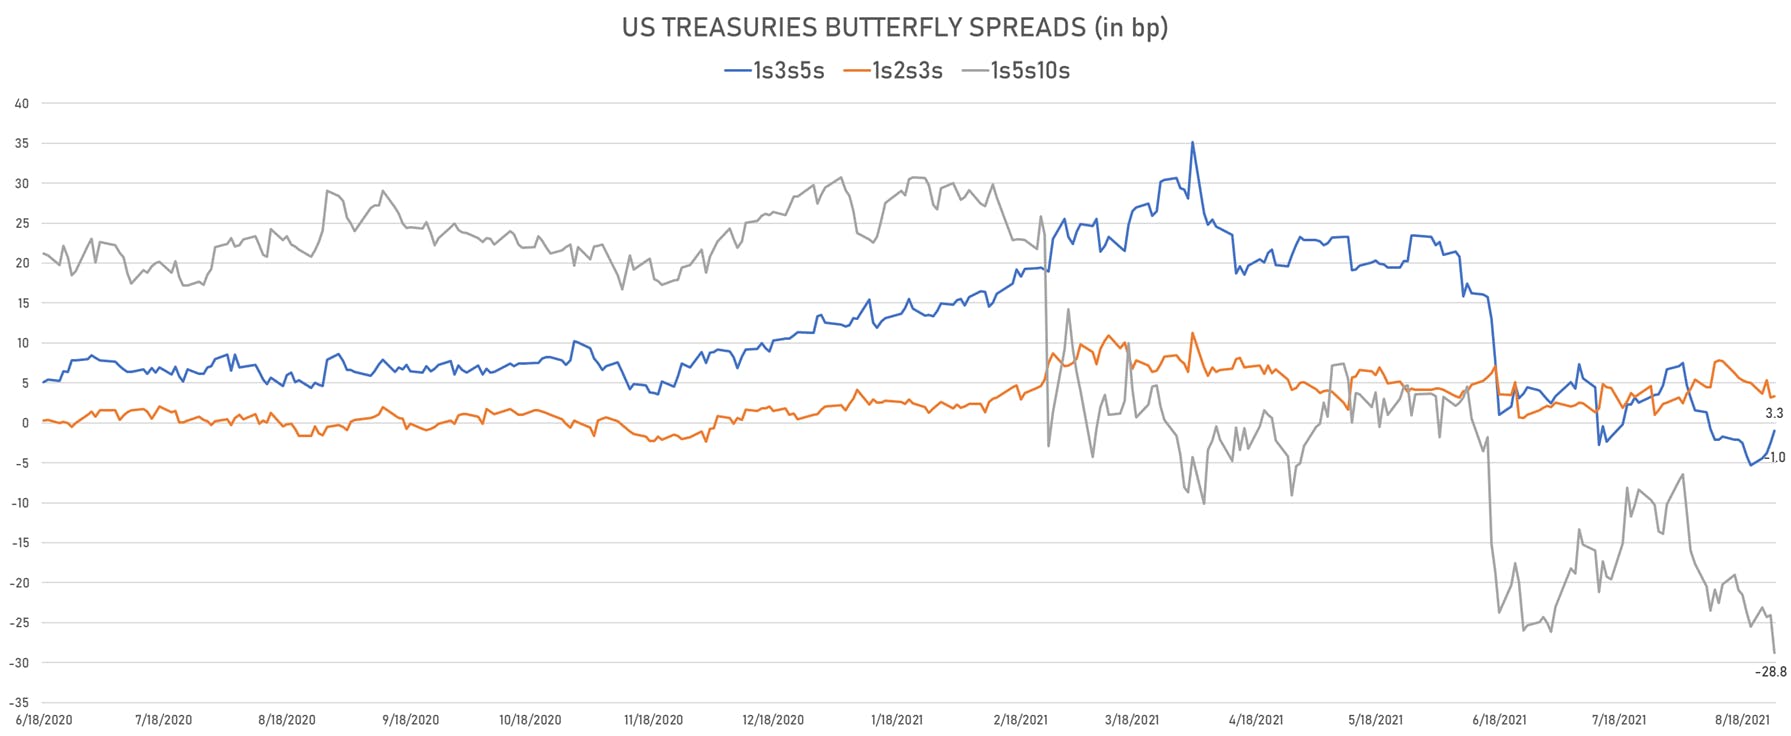 US Treasuries Butterfly Spreads | Sources: phipost.com, Refinitiv data